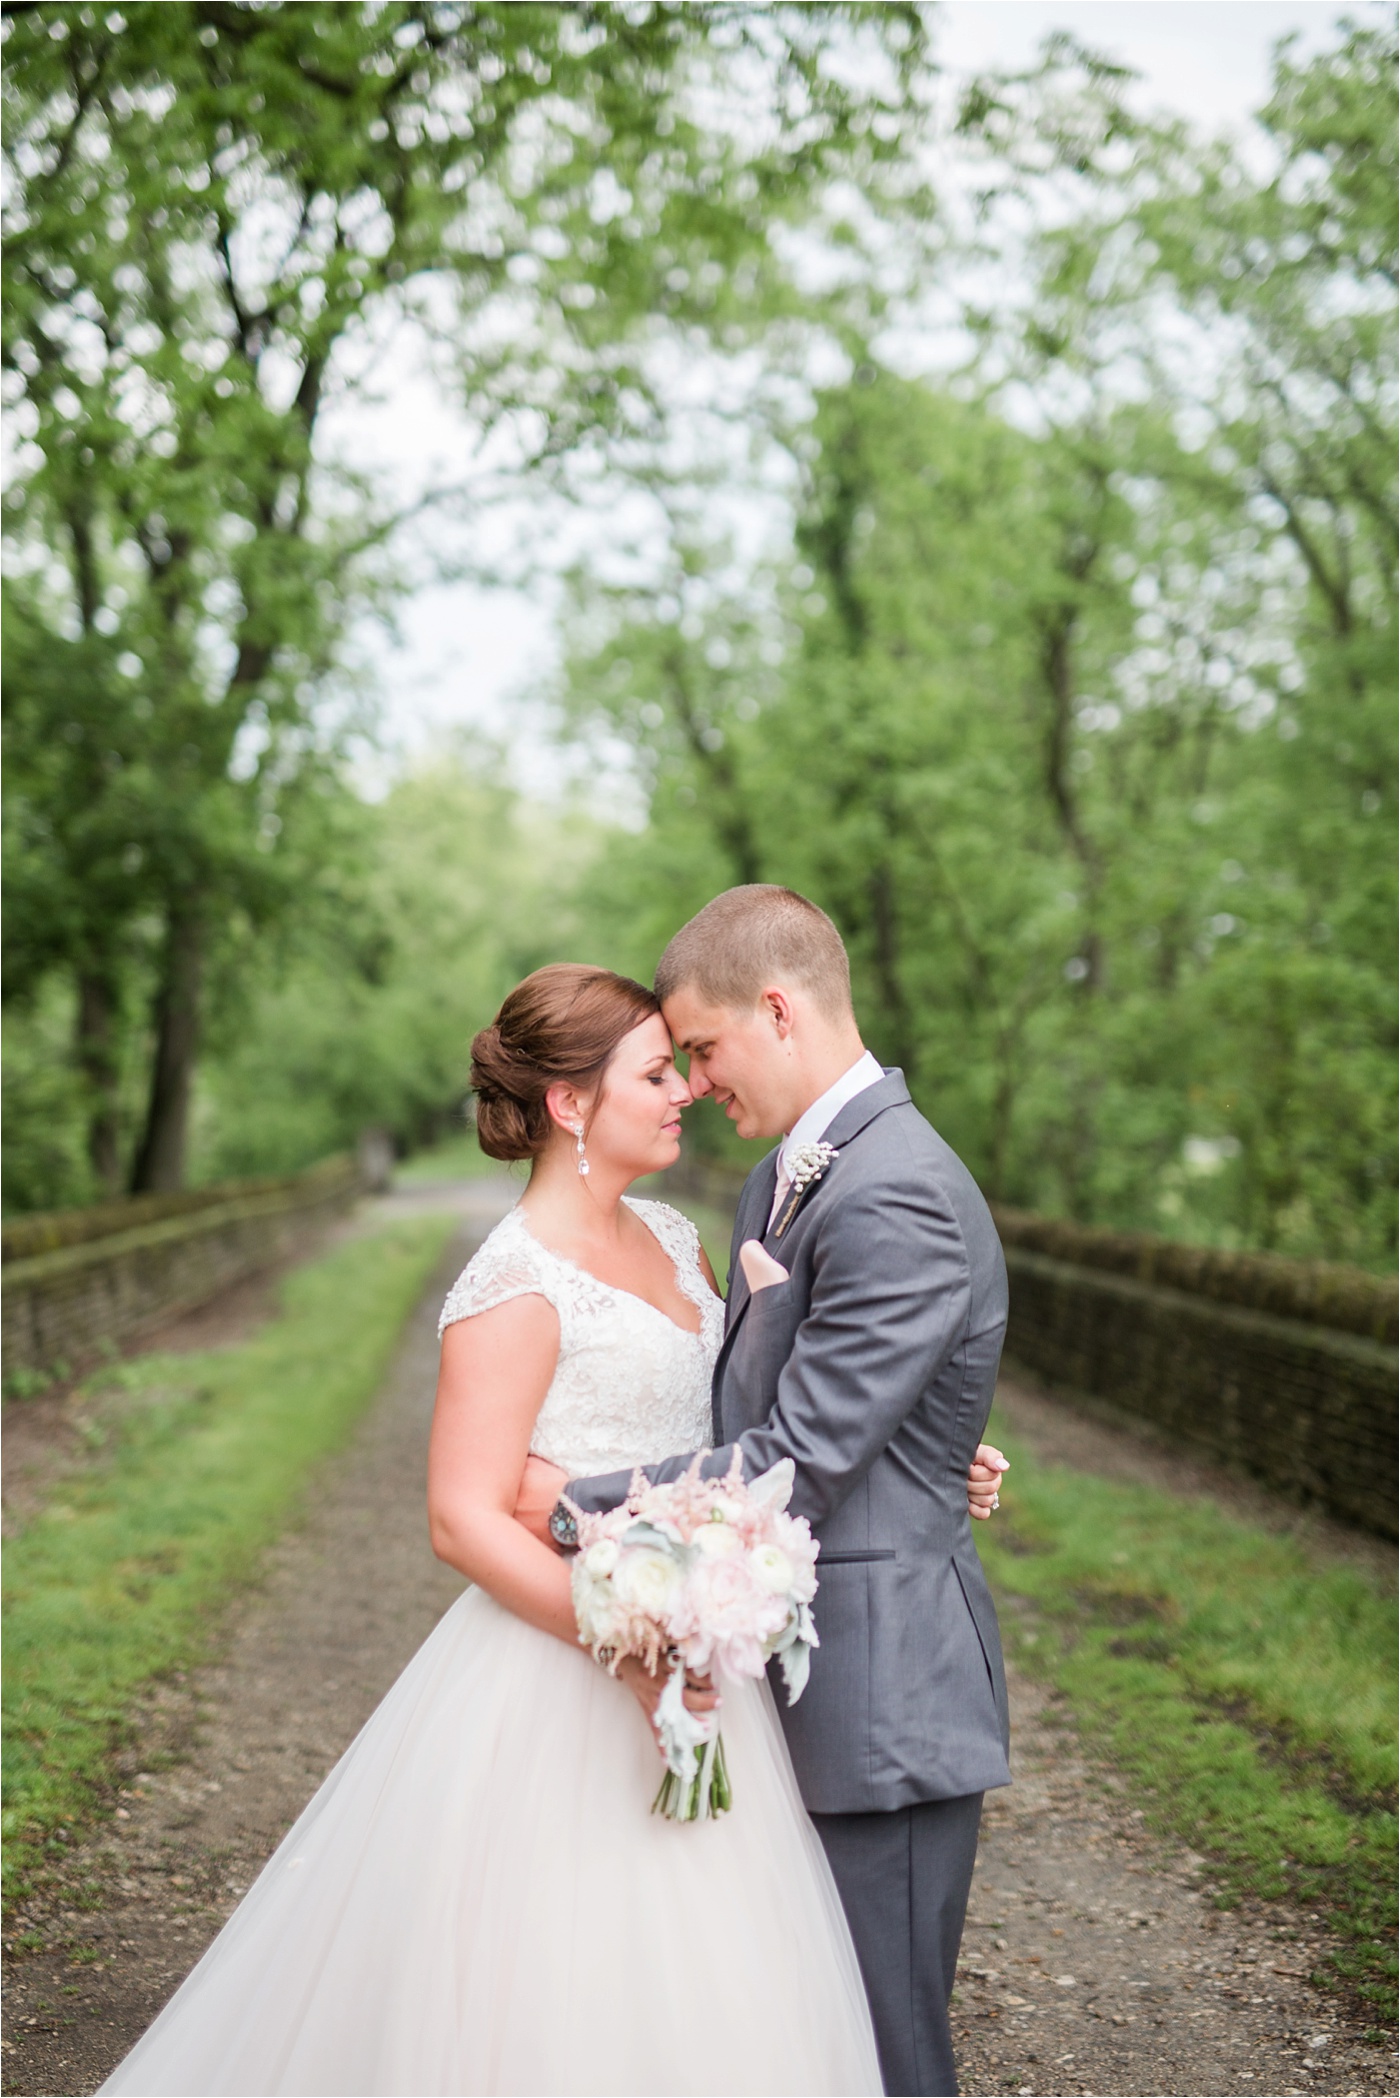 A Blush Outdoor wedding at Irongate Equestrian | KariMe Photography_0121